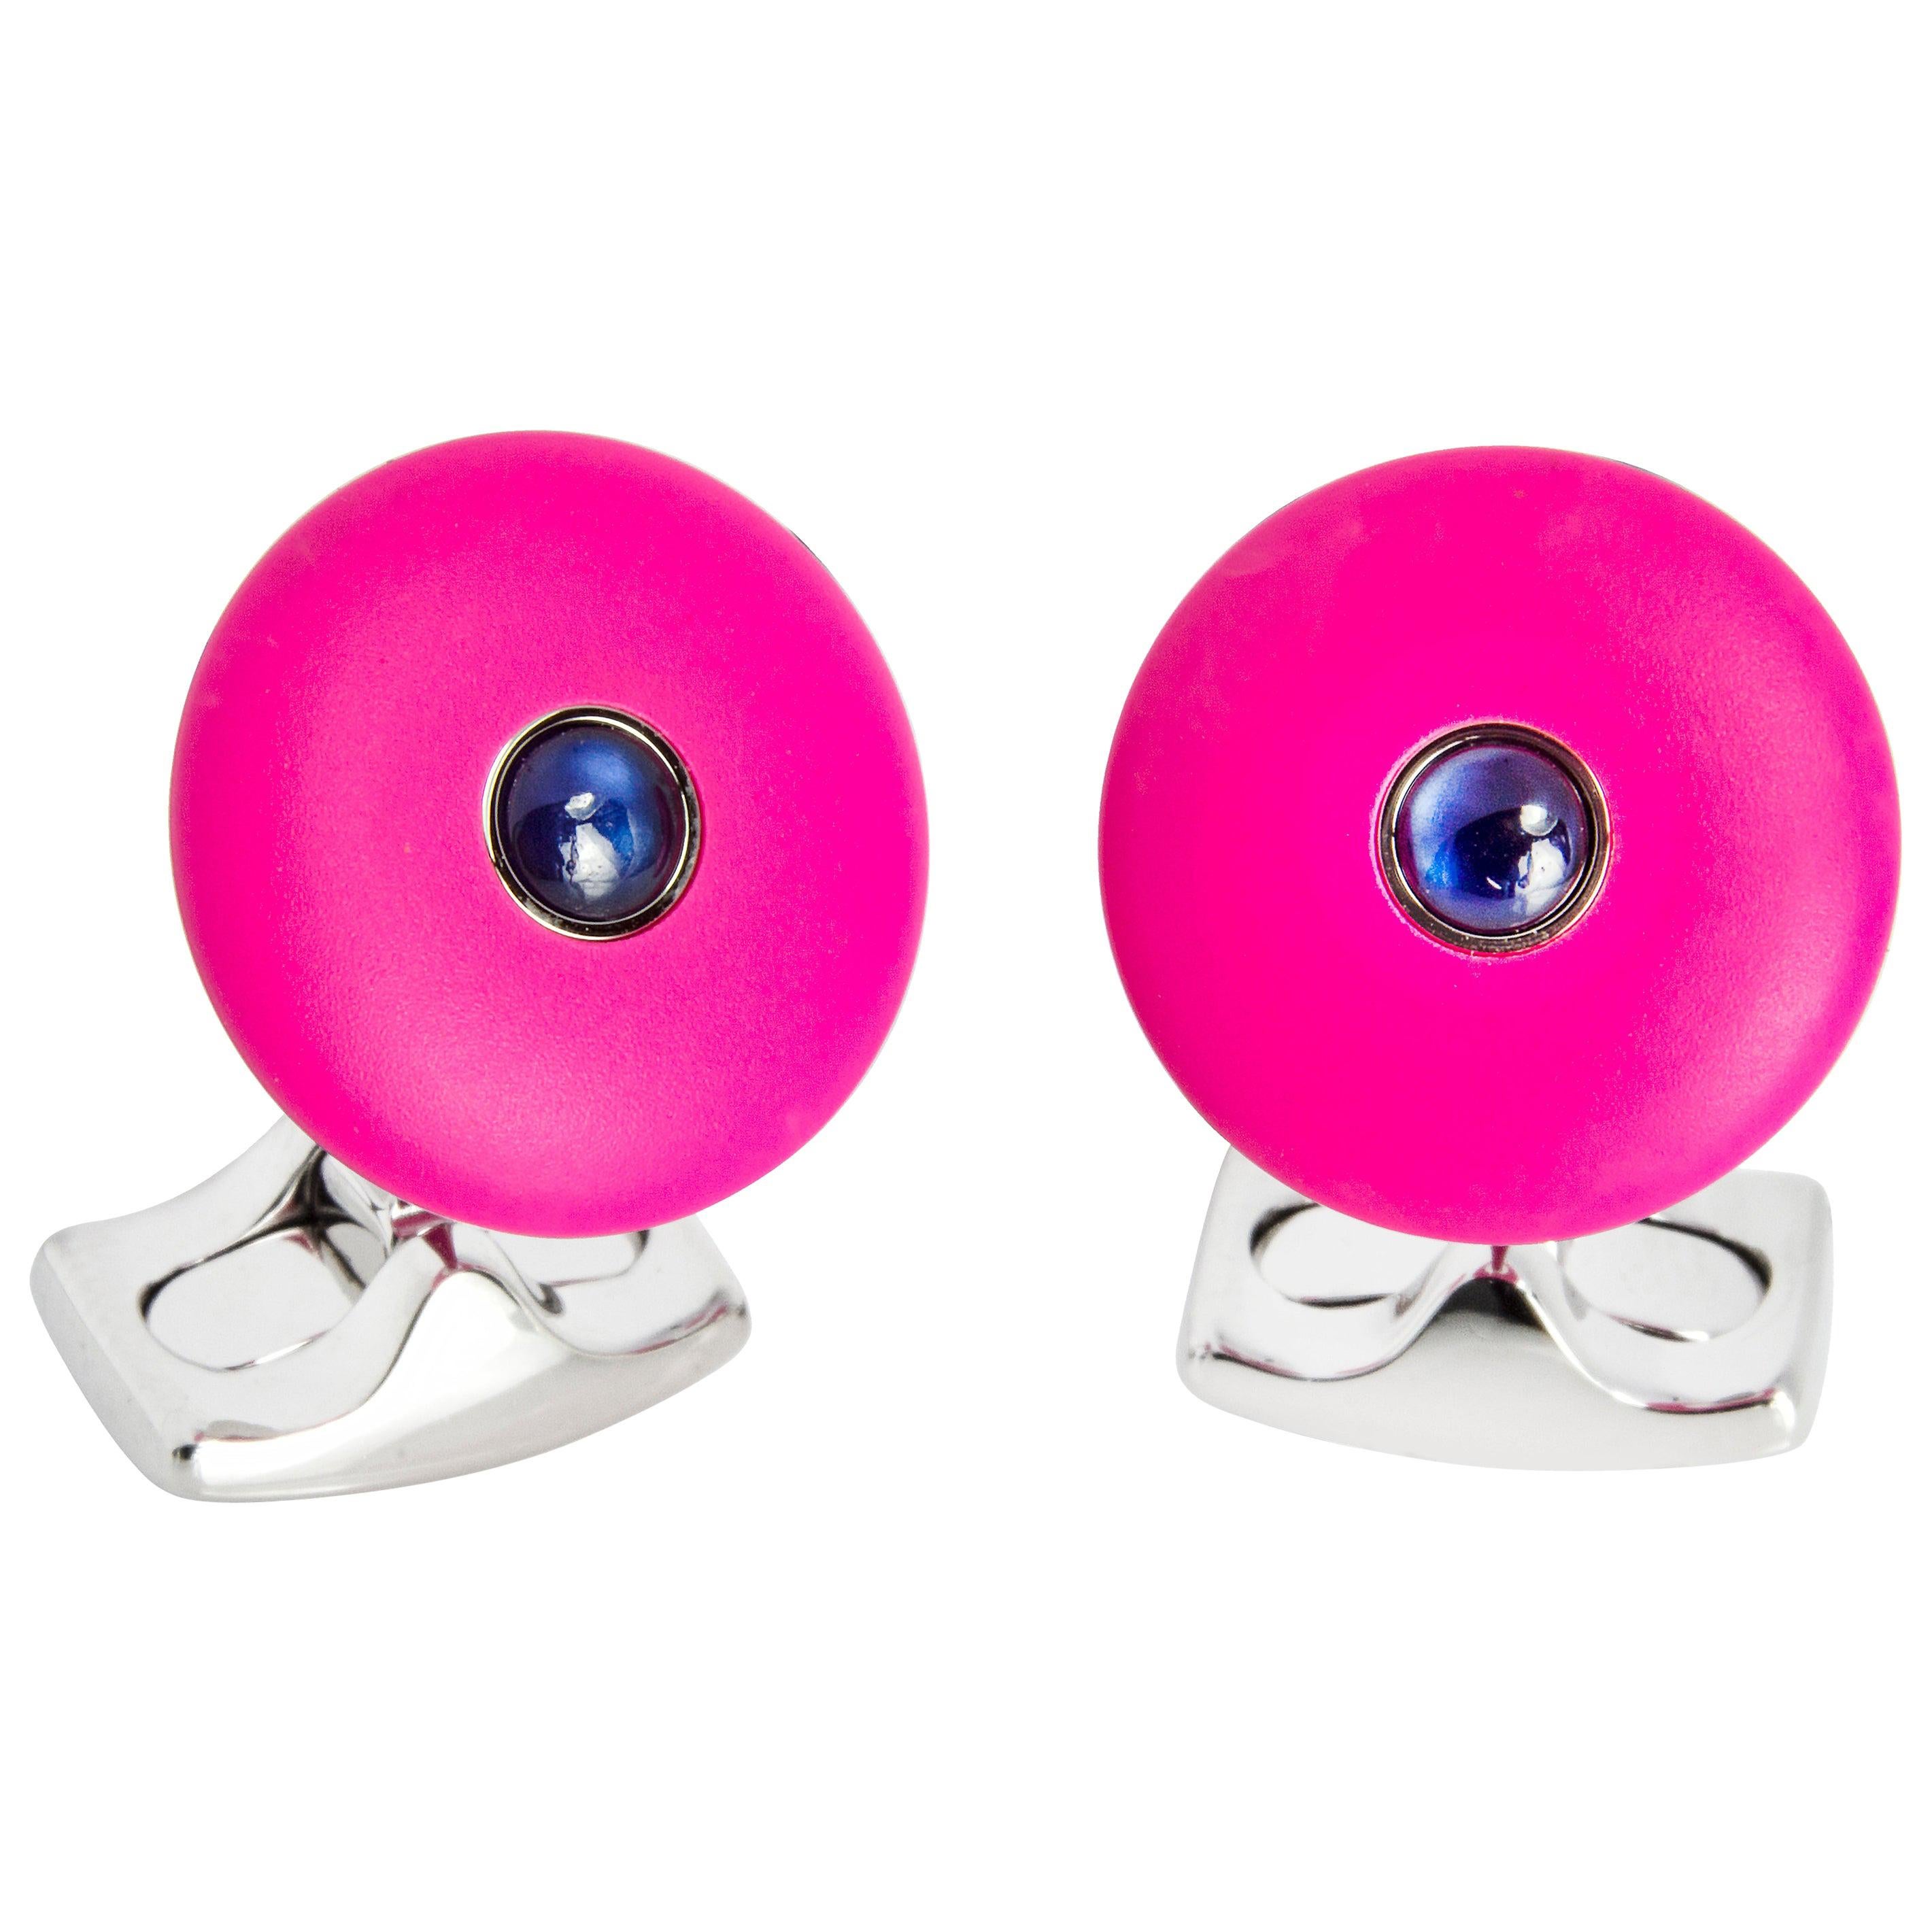 'The Brights' Hot Pink Round Cufflinks with Sapphire Centre